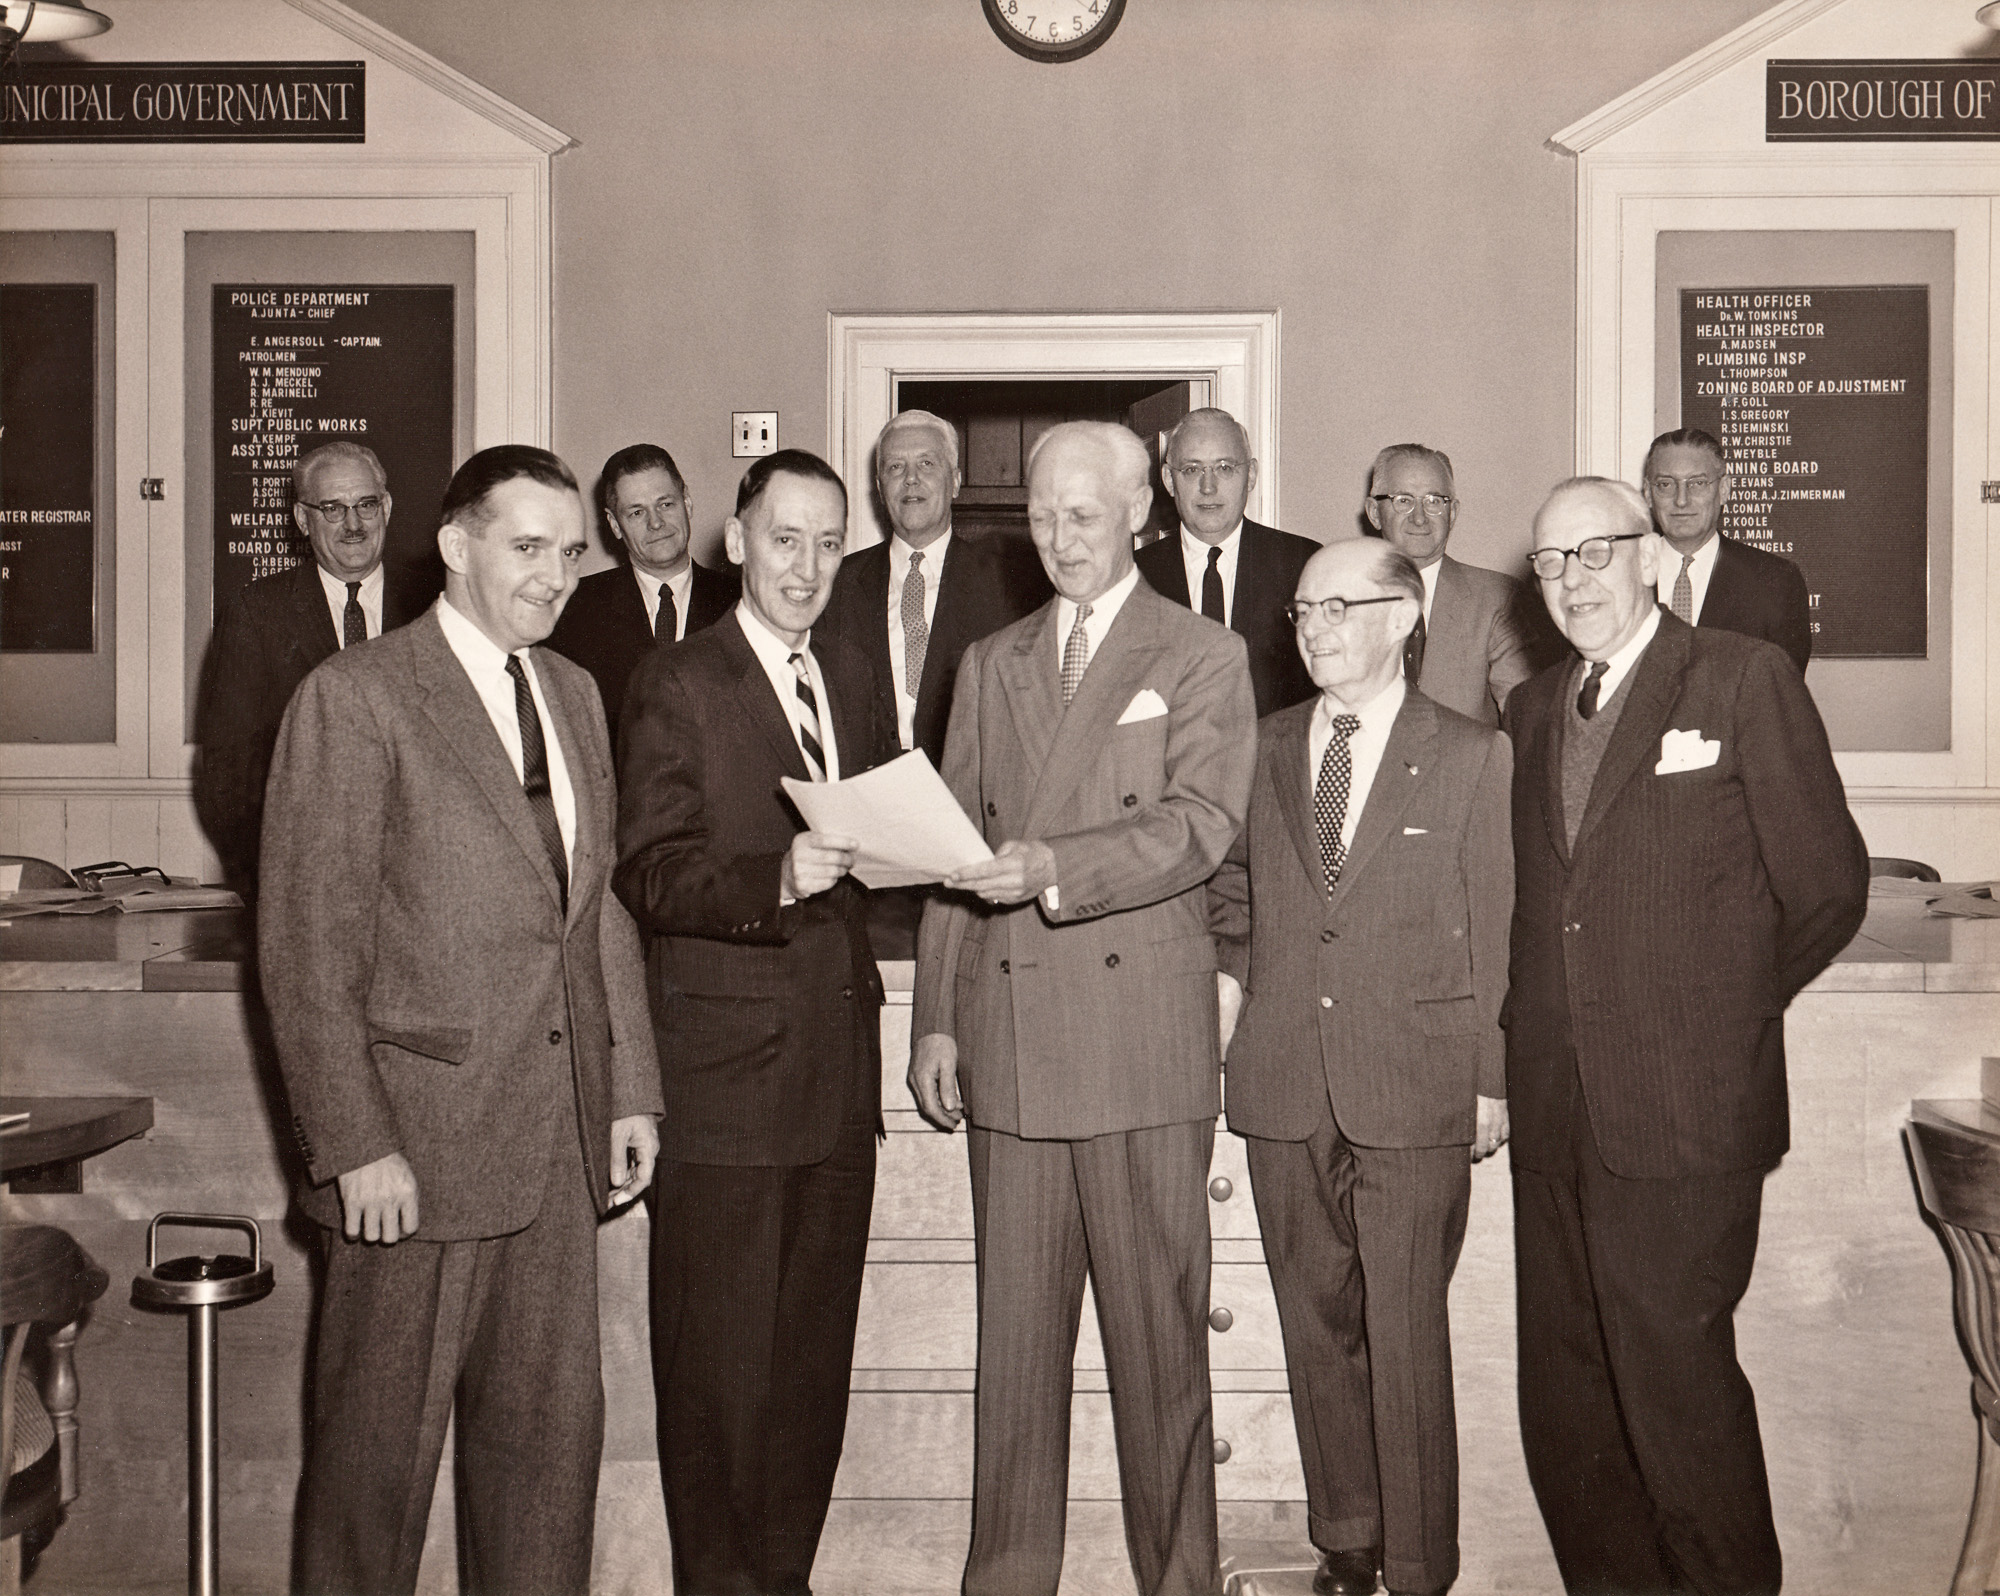 The Ho-Ho-Kus, New Jersey town council swears in Mayor A.J. Zimmerman in the early 1950s. My grandfather is back left. View full size.